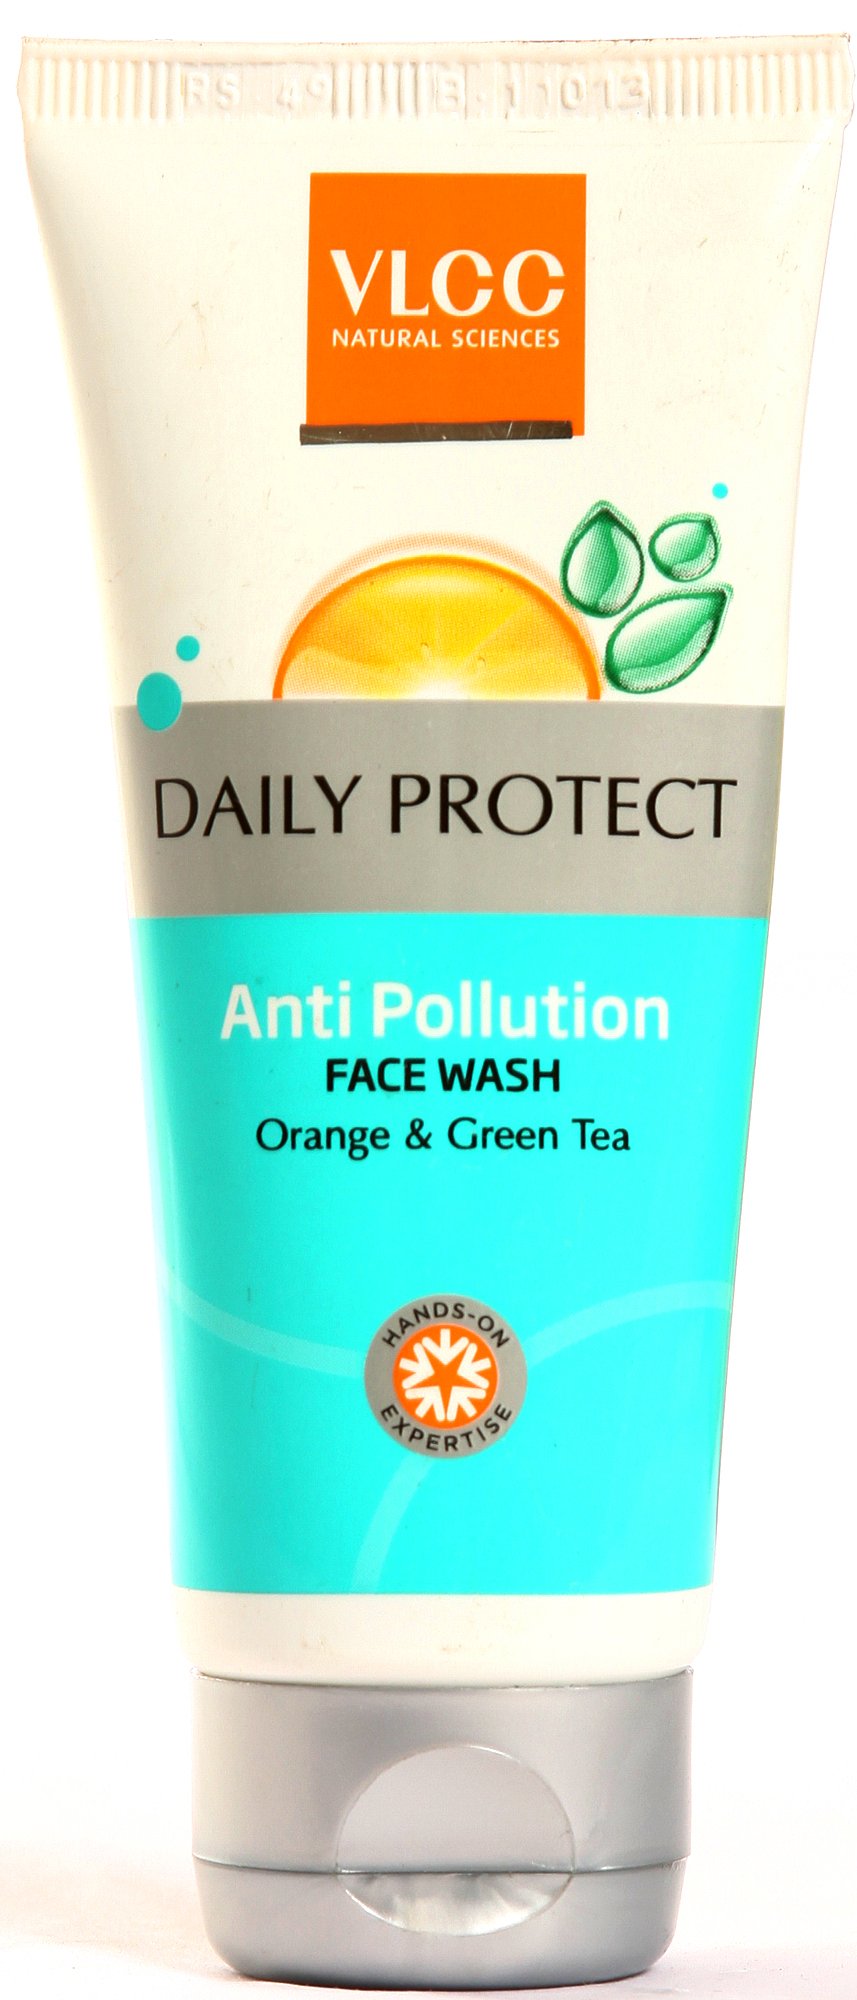 VLCC Daily Protect Anti pollution Face Wash - book cover